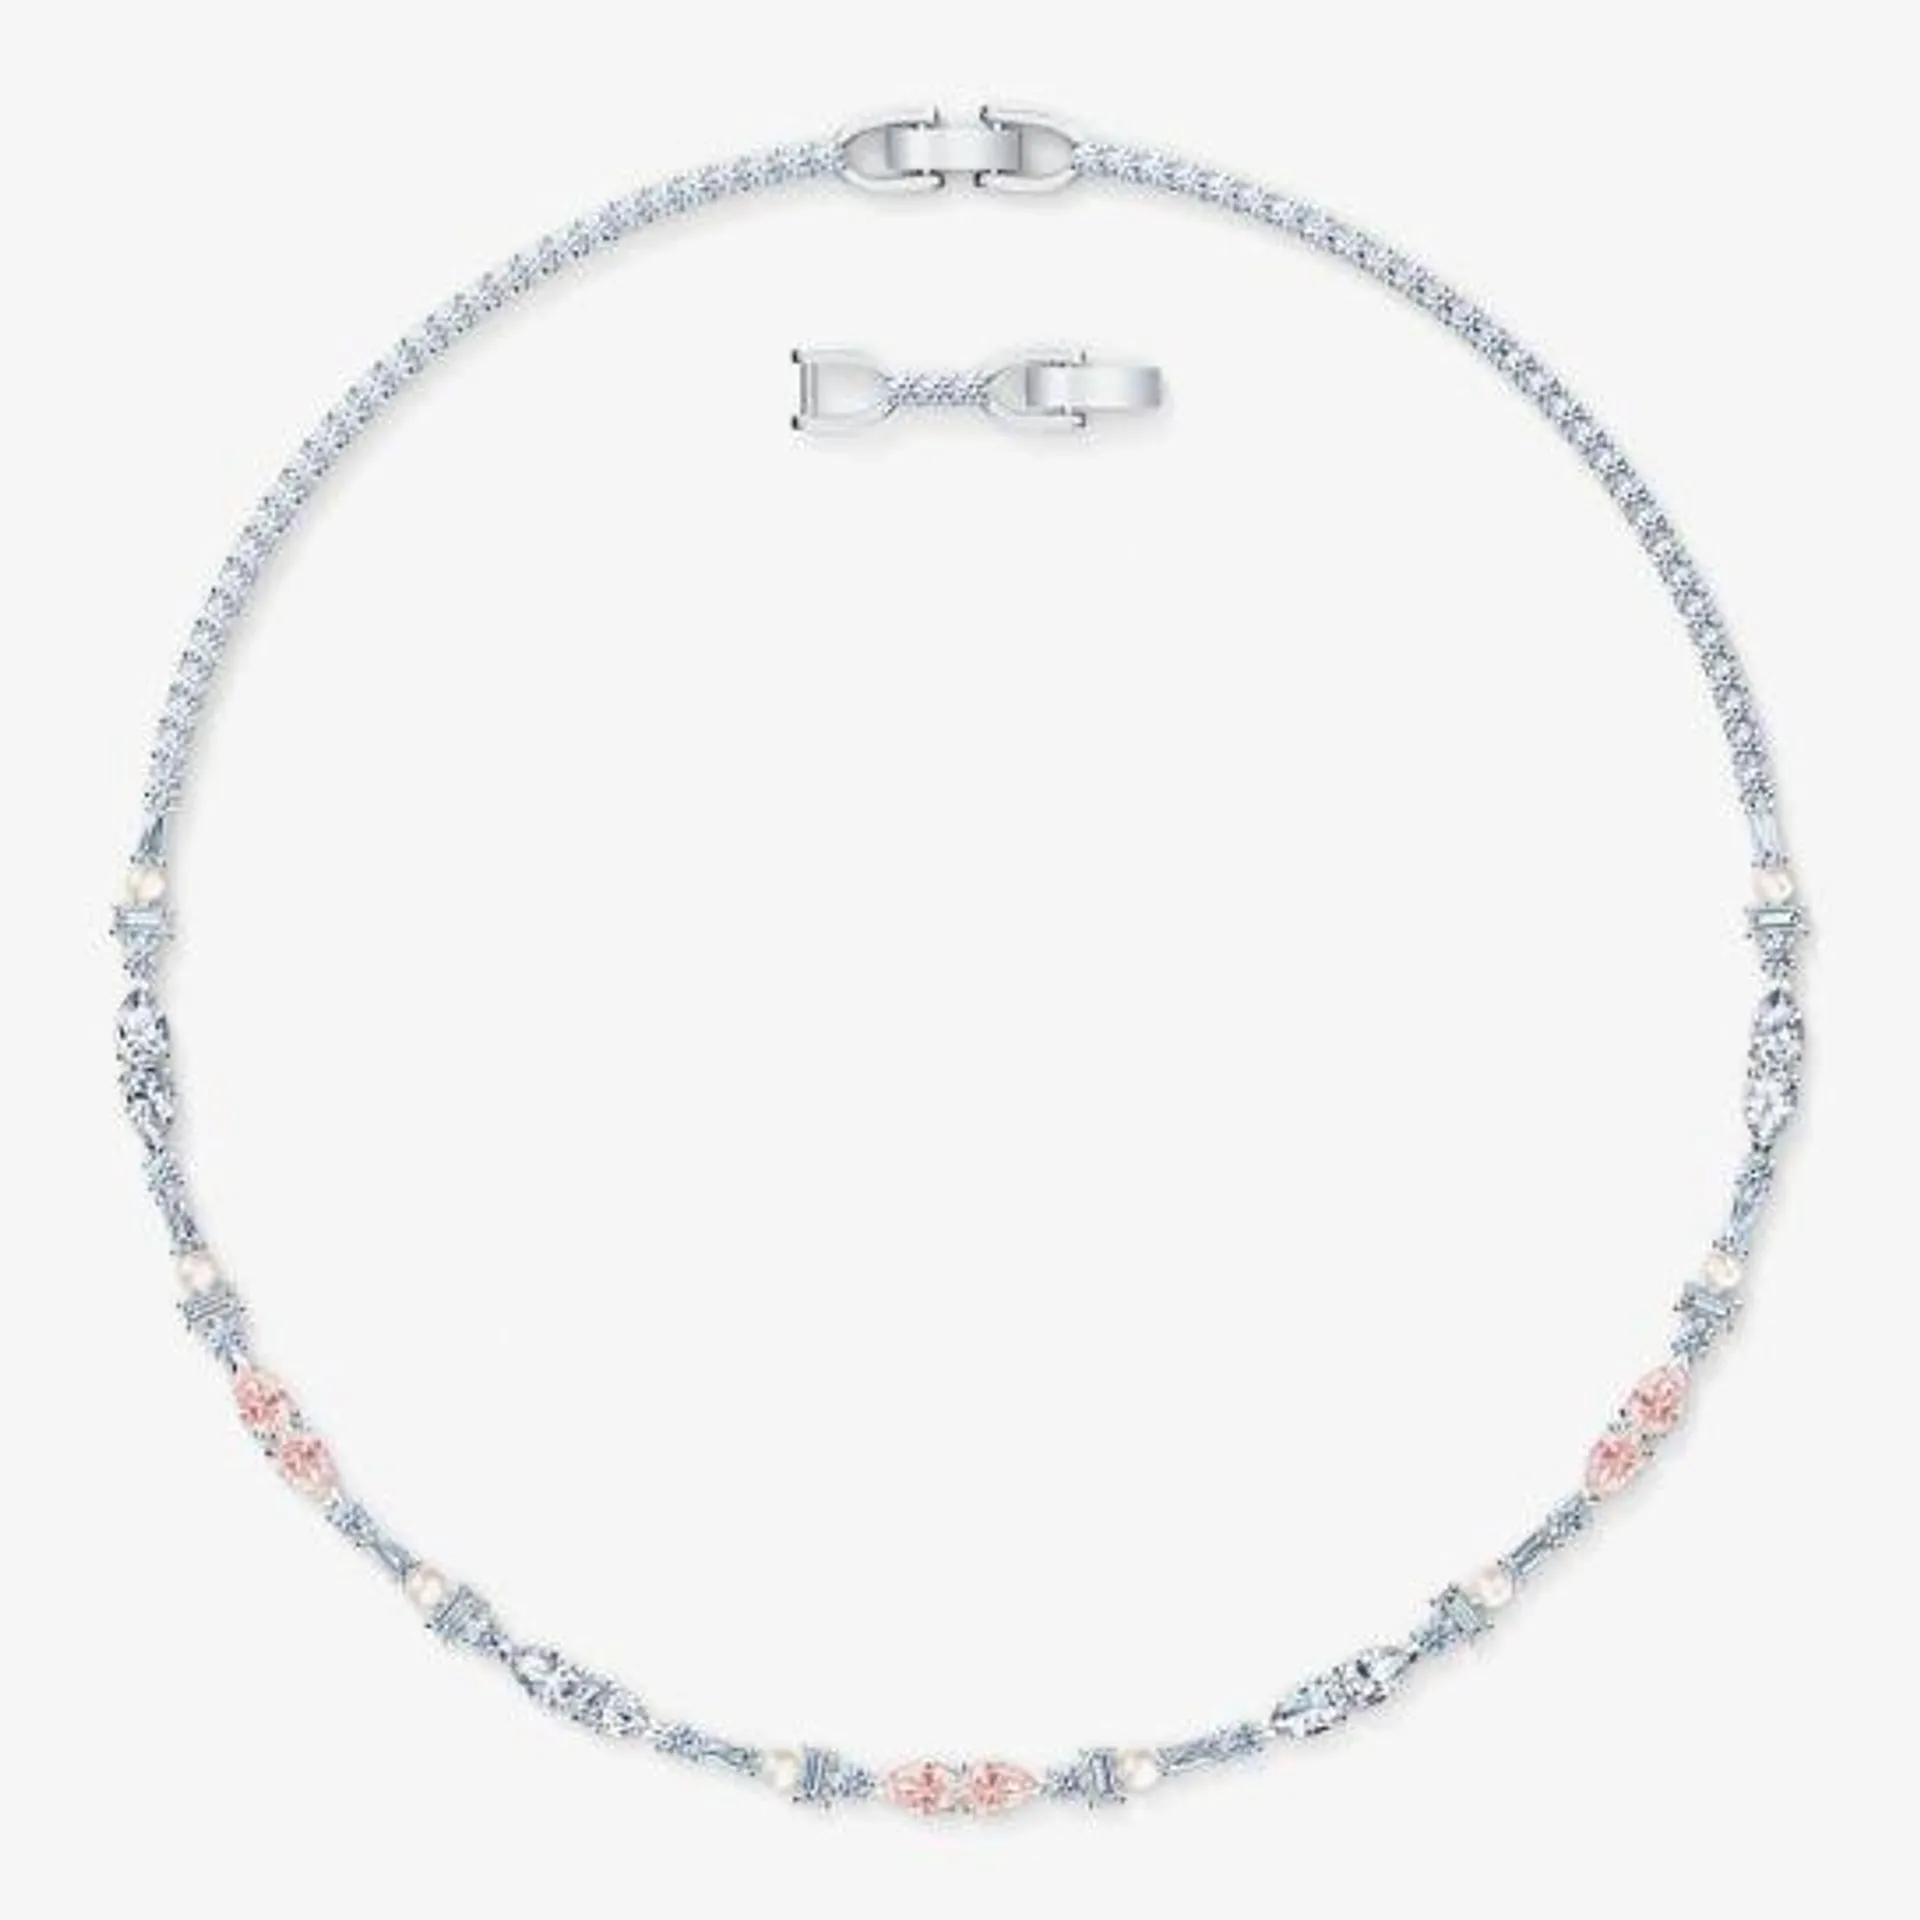 Swarovski Perfection Crystal and Pearl Chaton Necklace 5515514